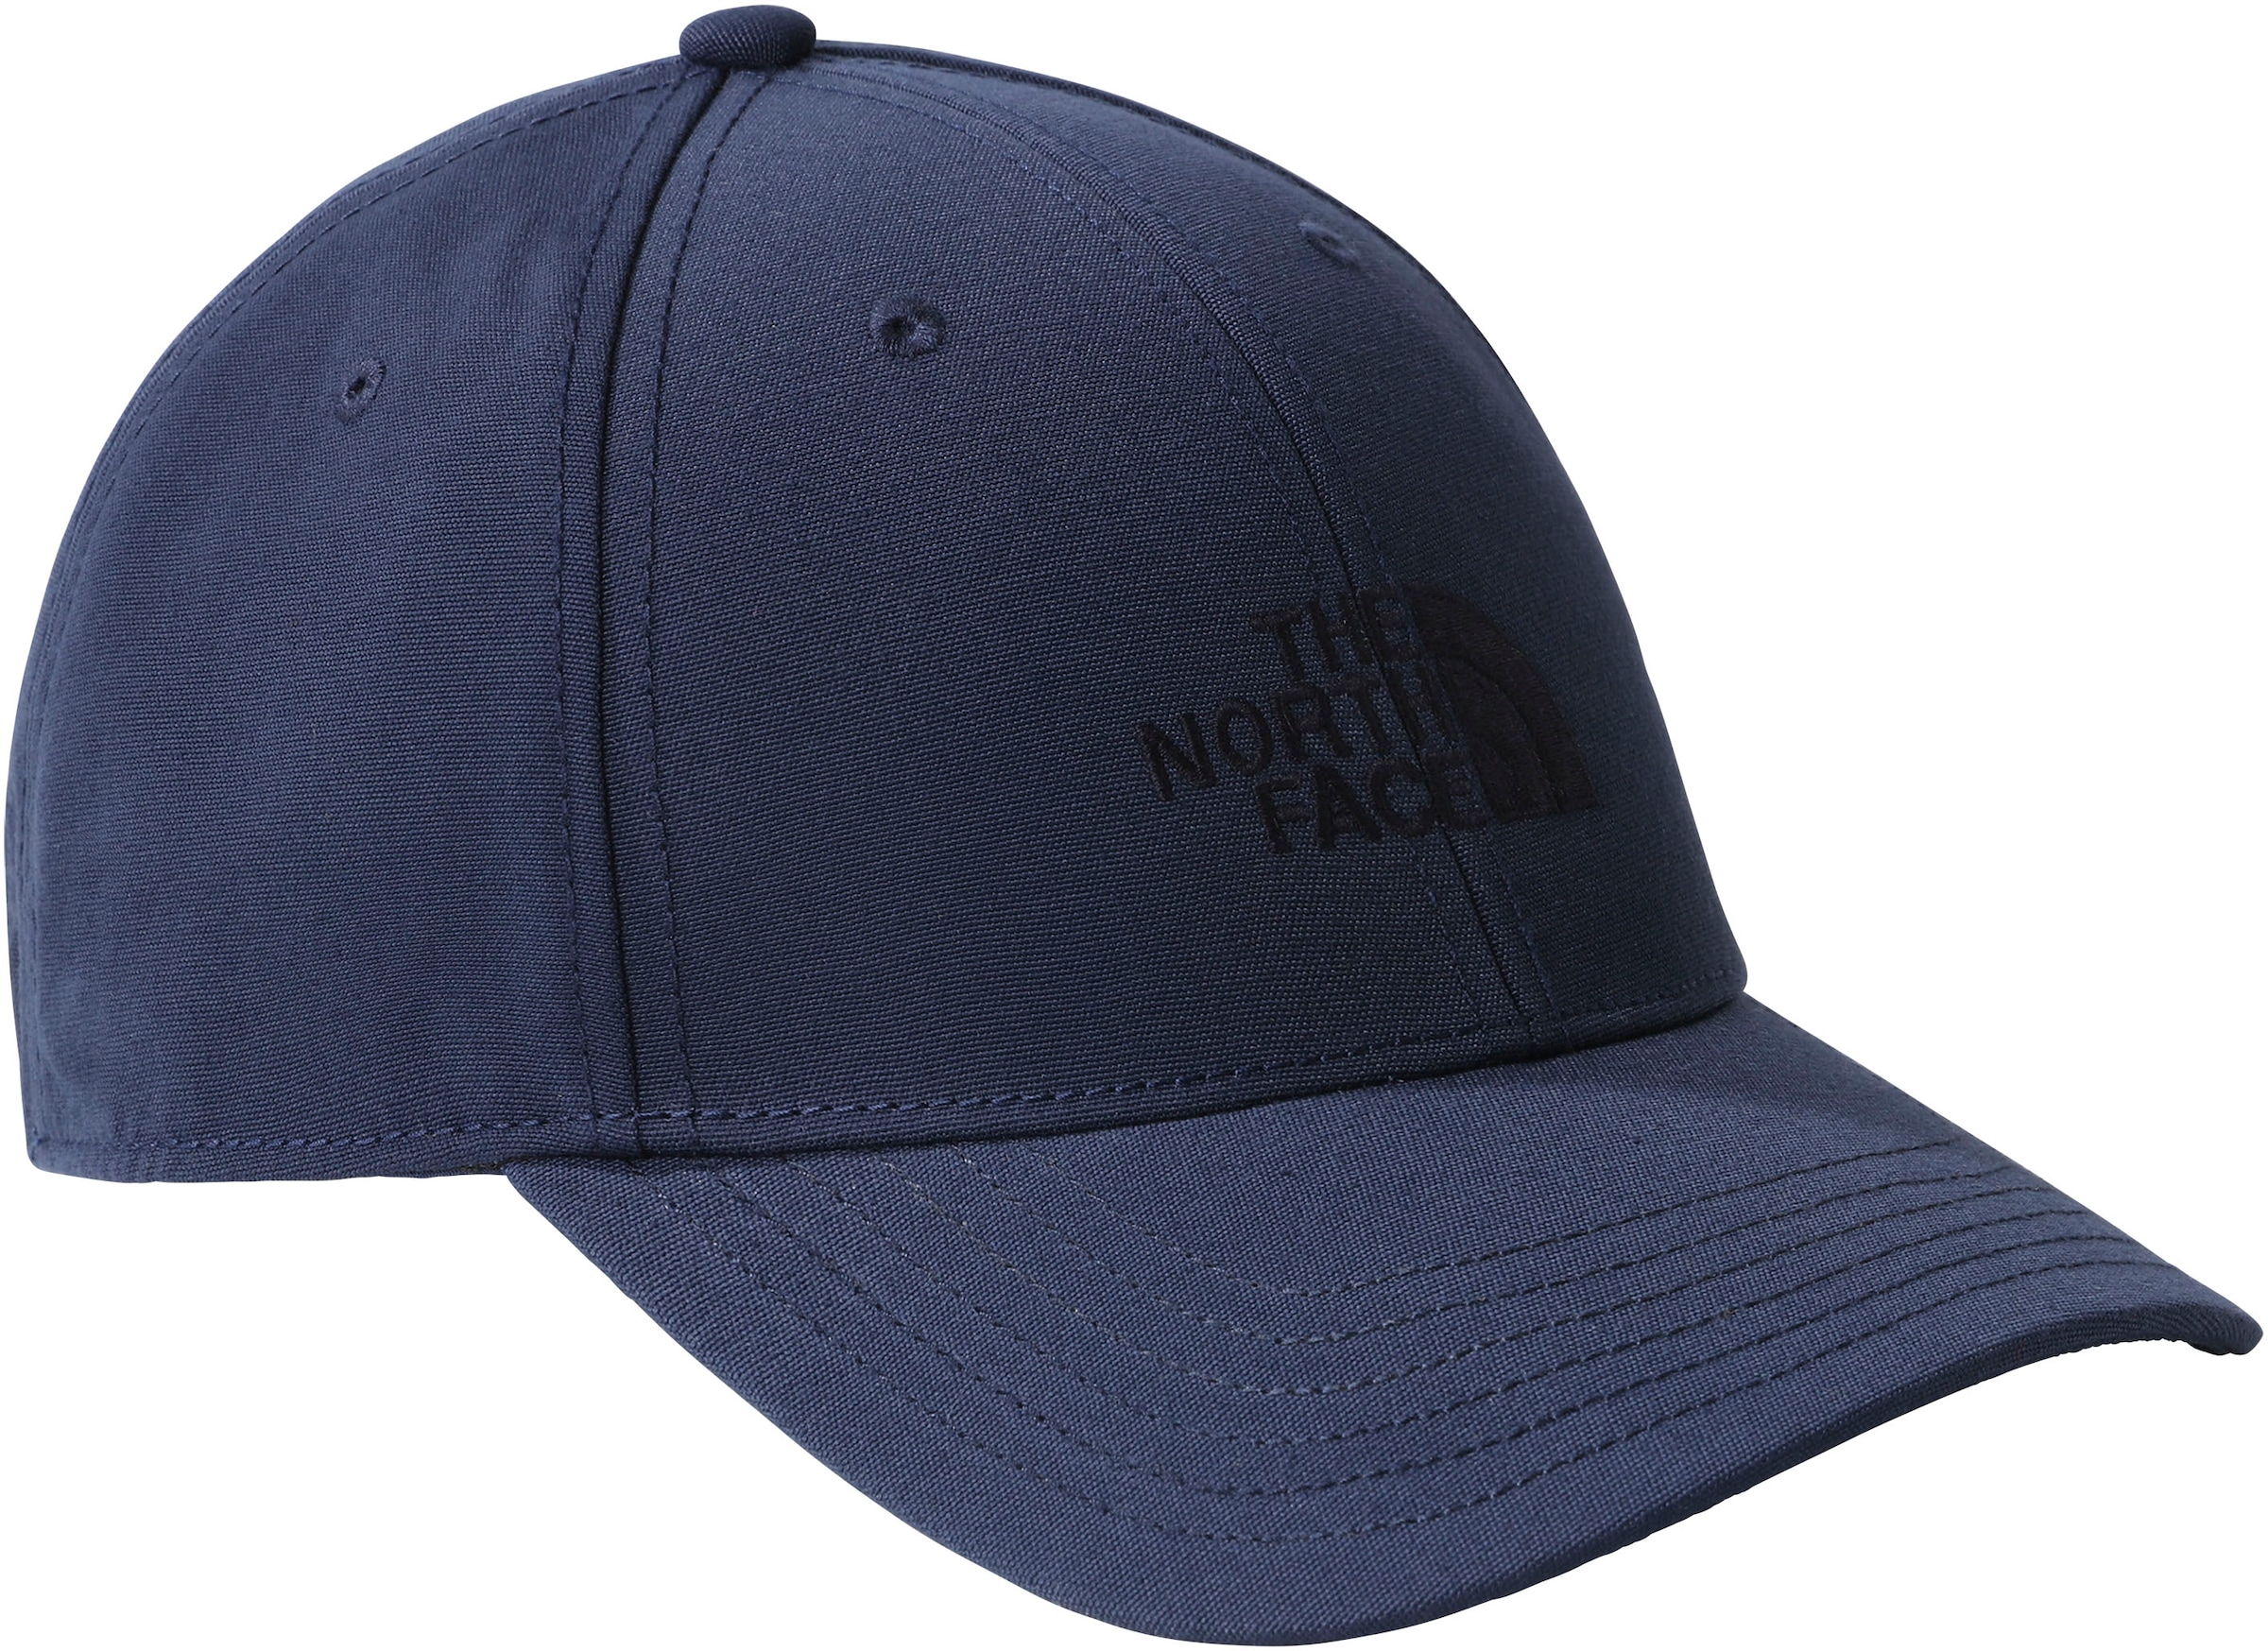 OTTO North OTTO The CLASSIC »RECYCLED Face bei Cap | HAT« bestellen 66 Baseball